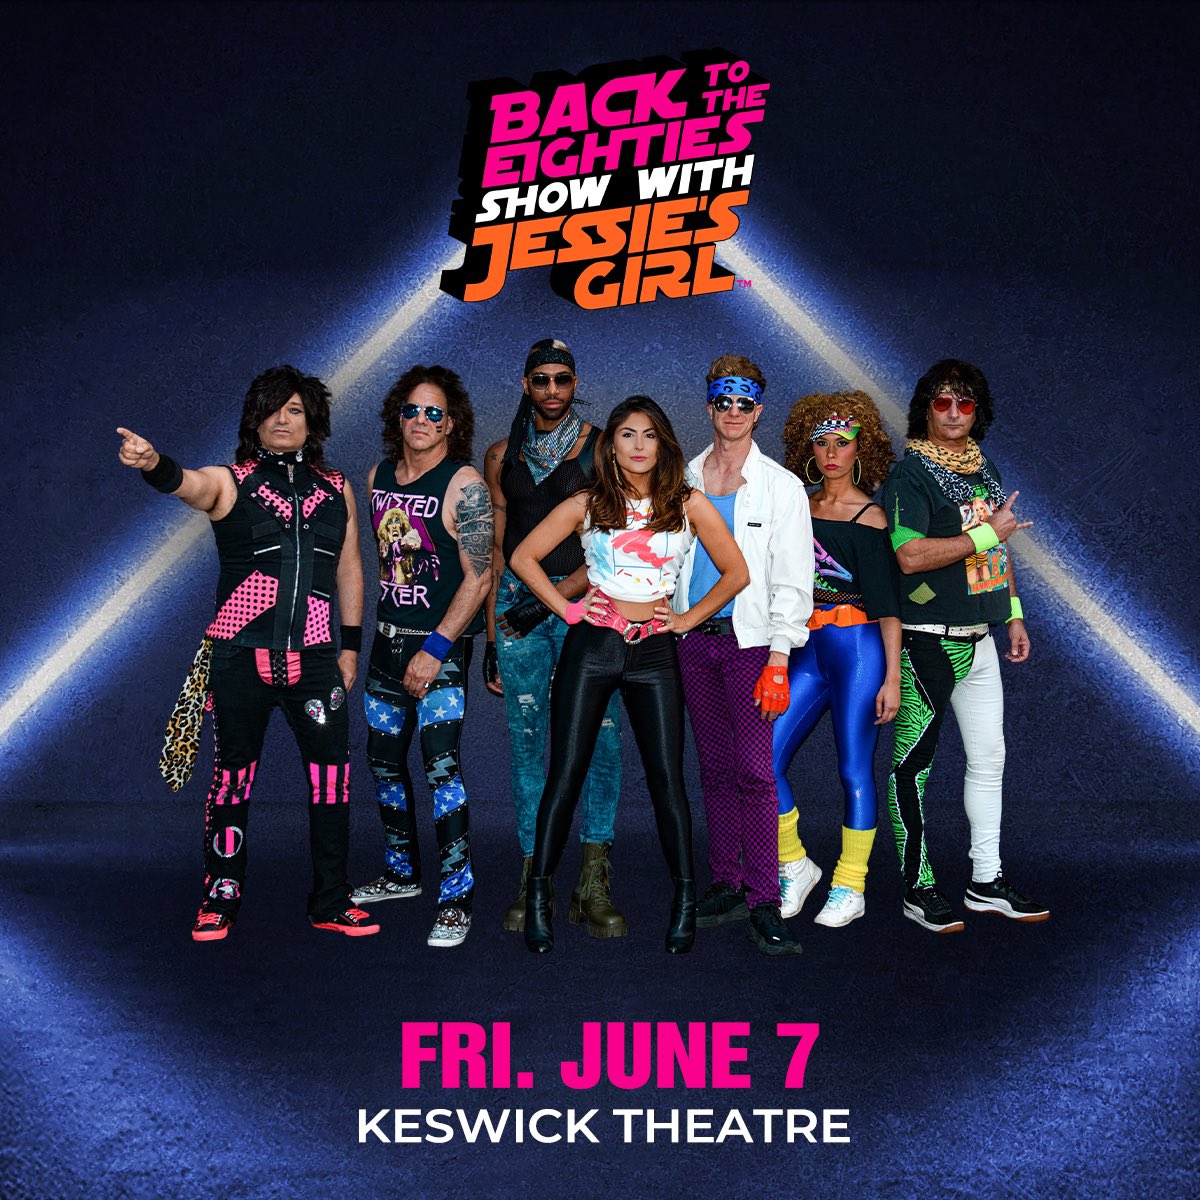 We’re recharging our batteries with a nice long holiday weekend, because we need all of our energy for 6/7 with the Back to the Eighties Show with Jessie’s Girl! This is always a ‘bodacious’ night out. Tickets are on sale now!